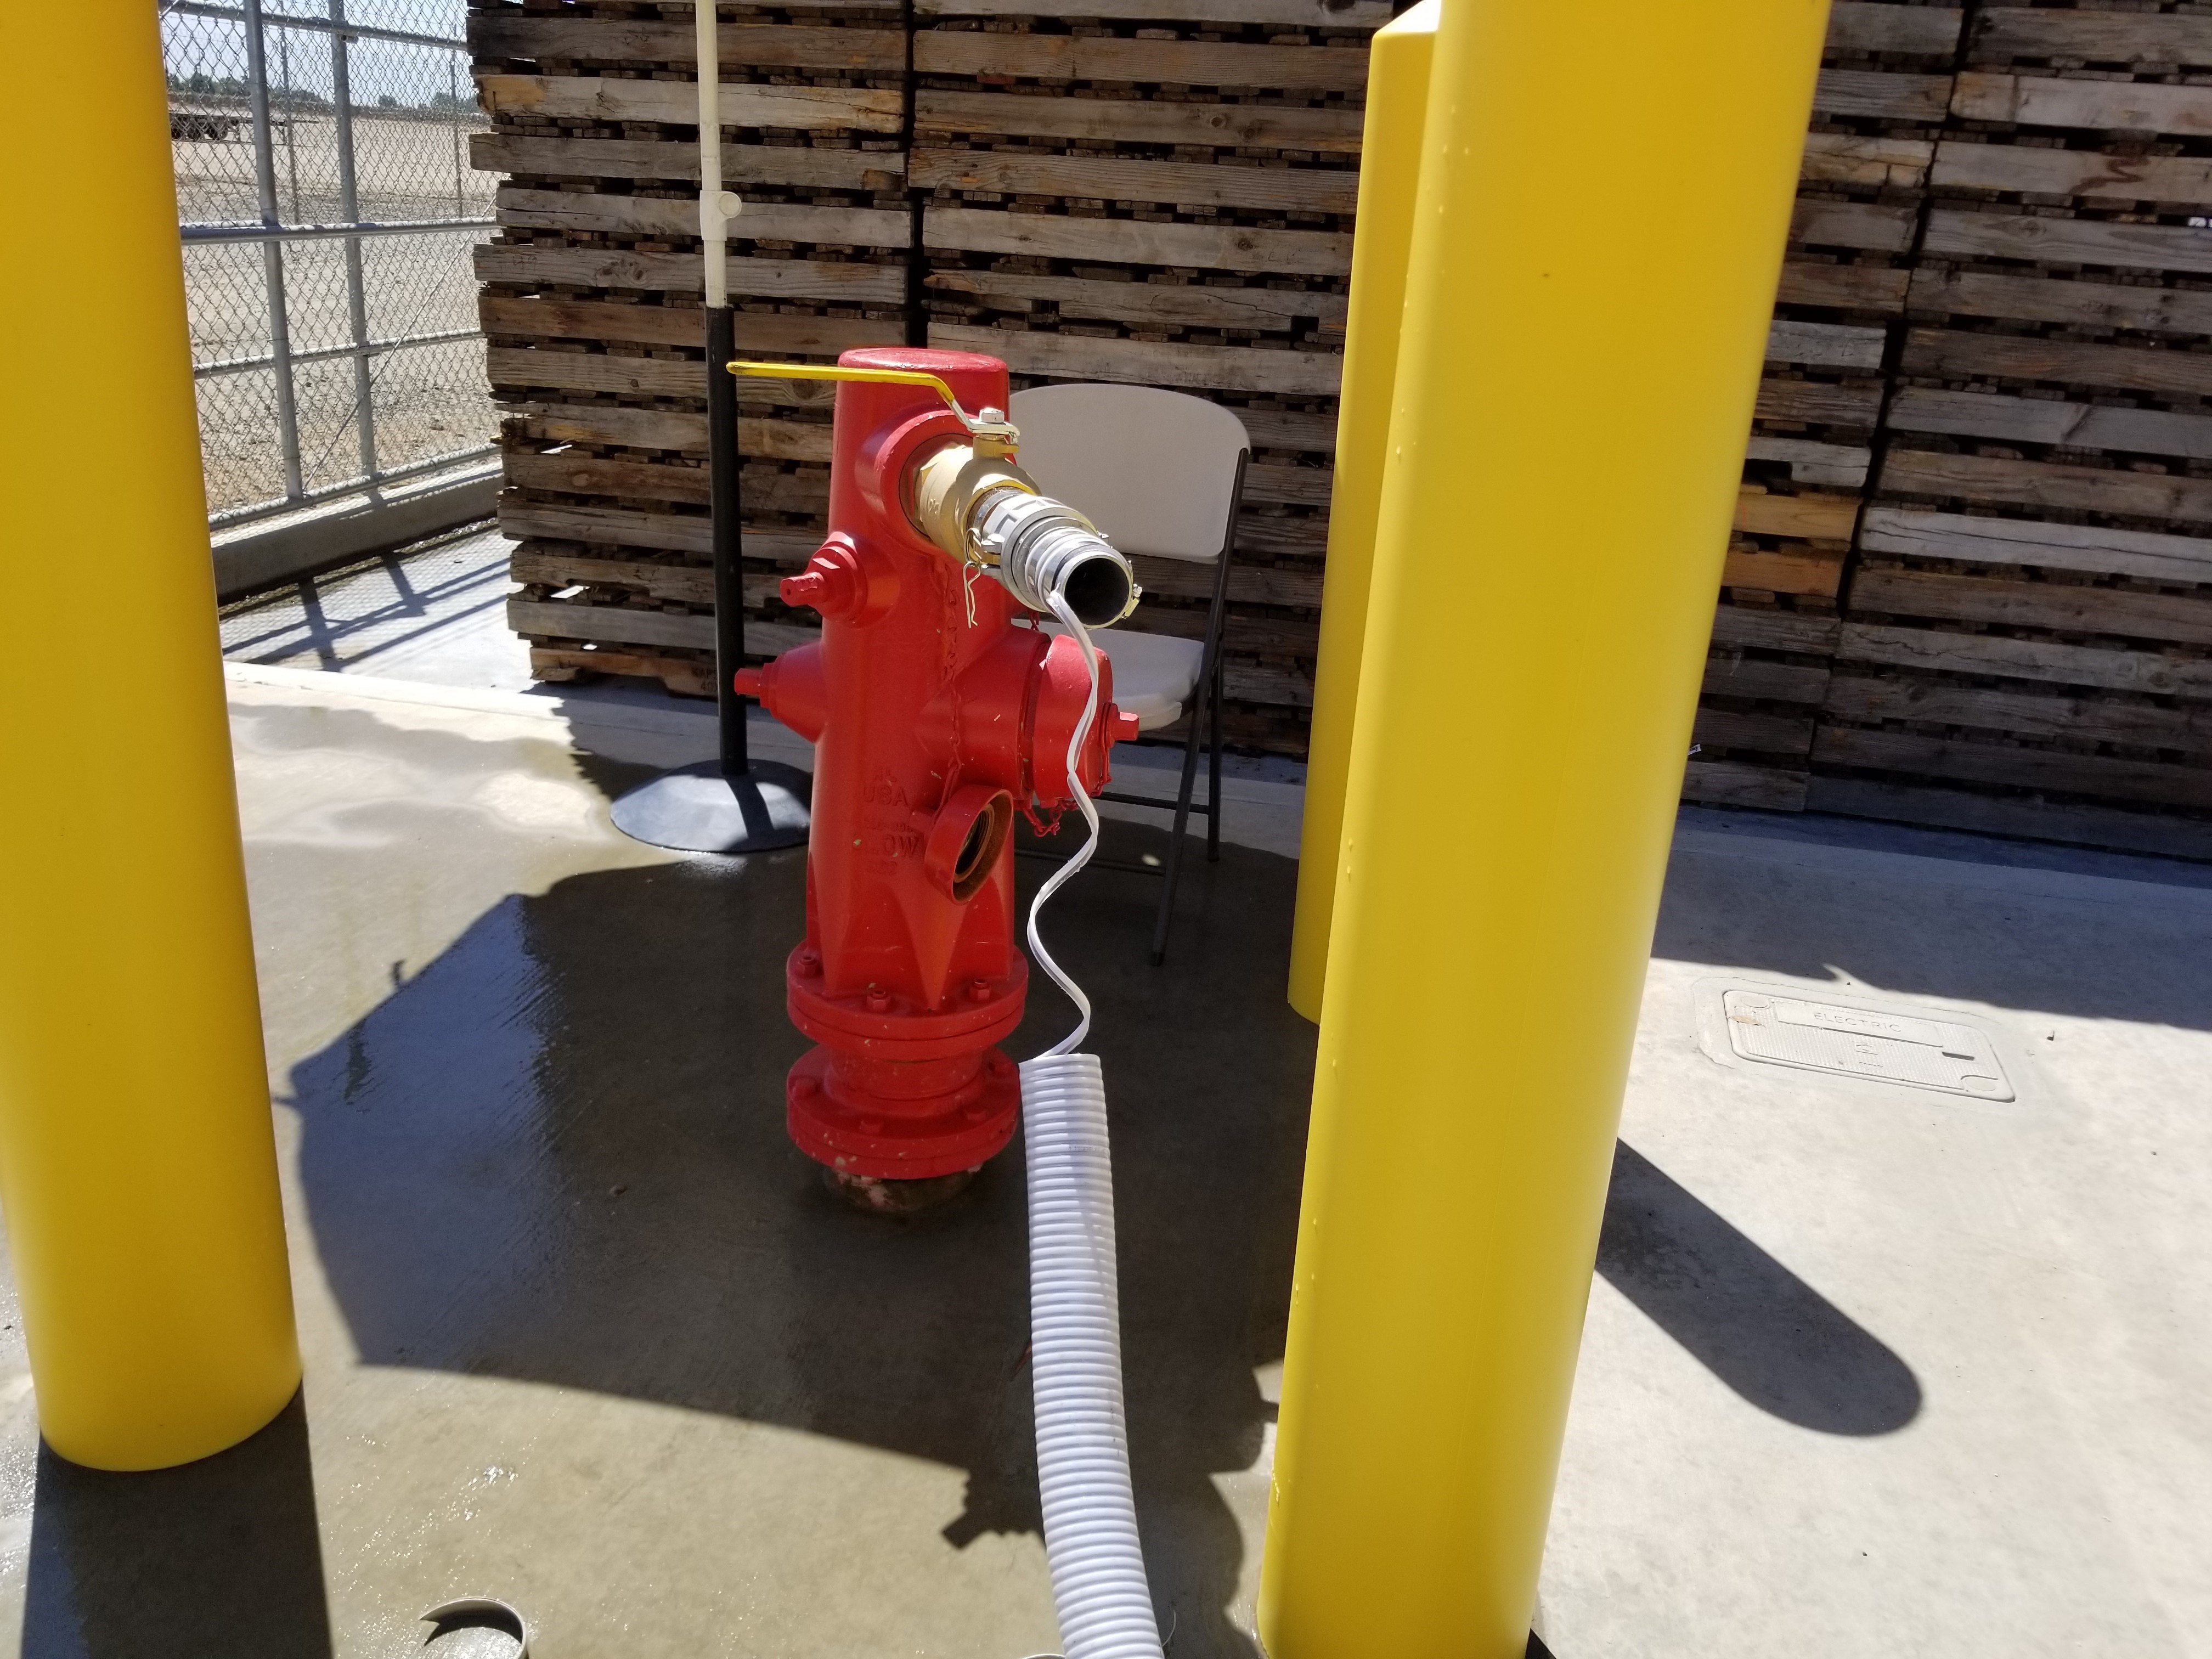 Exhibit1-Fire hydrant with torn hose attached